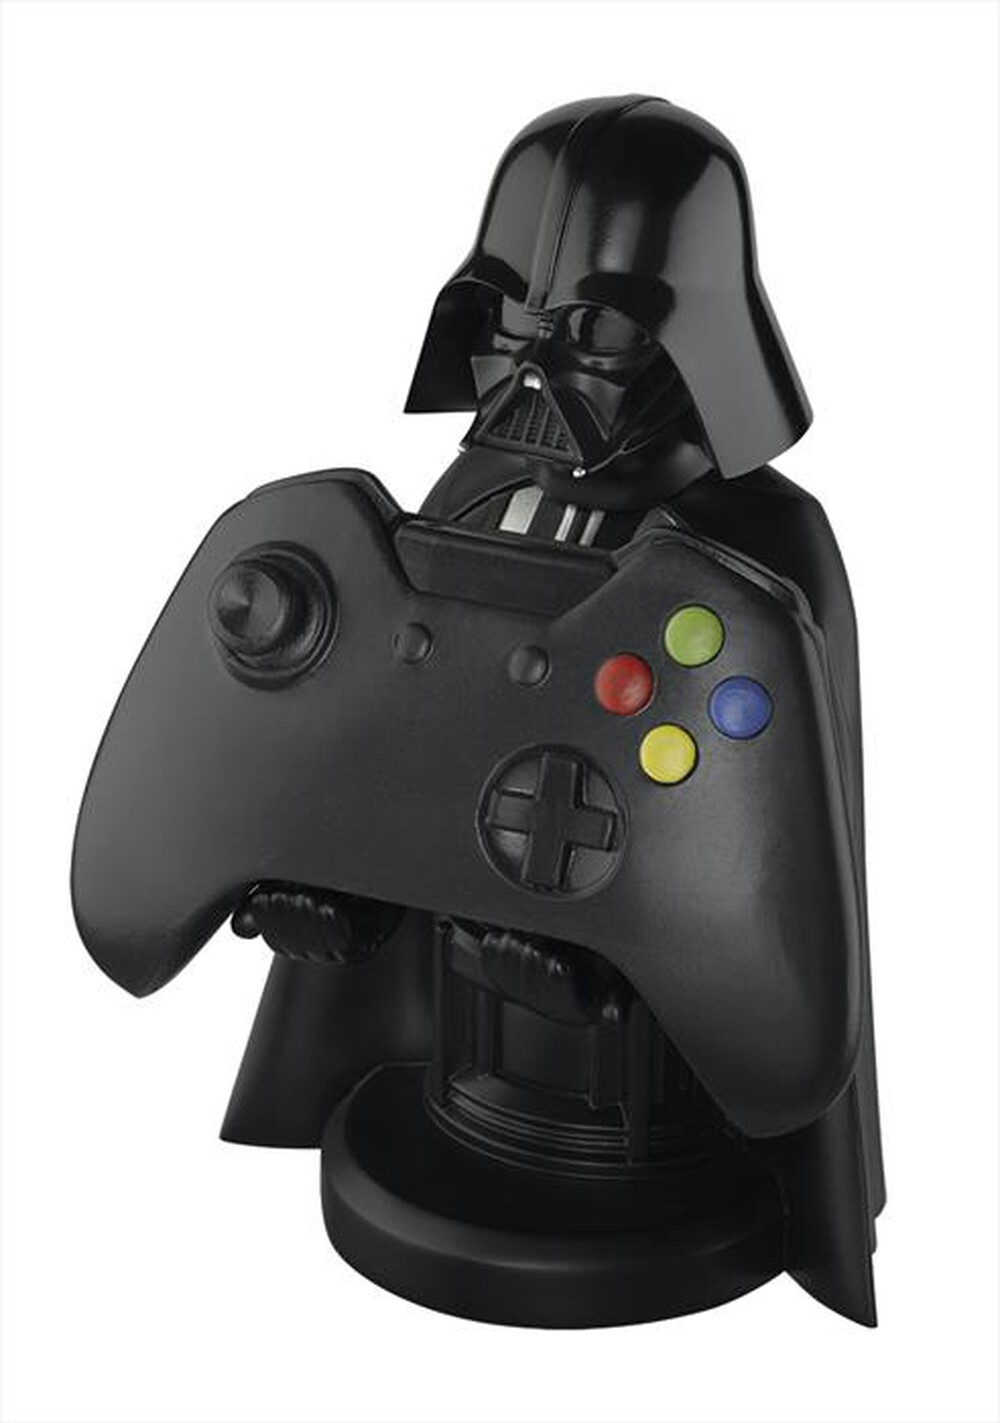 "EXQUISITE GAMING - DARTH VADER CABLE GUY"